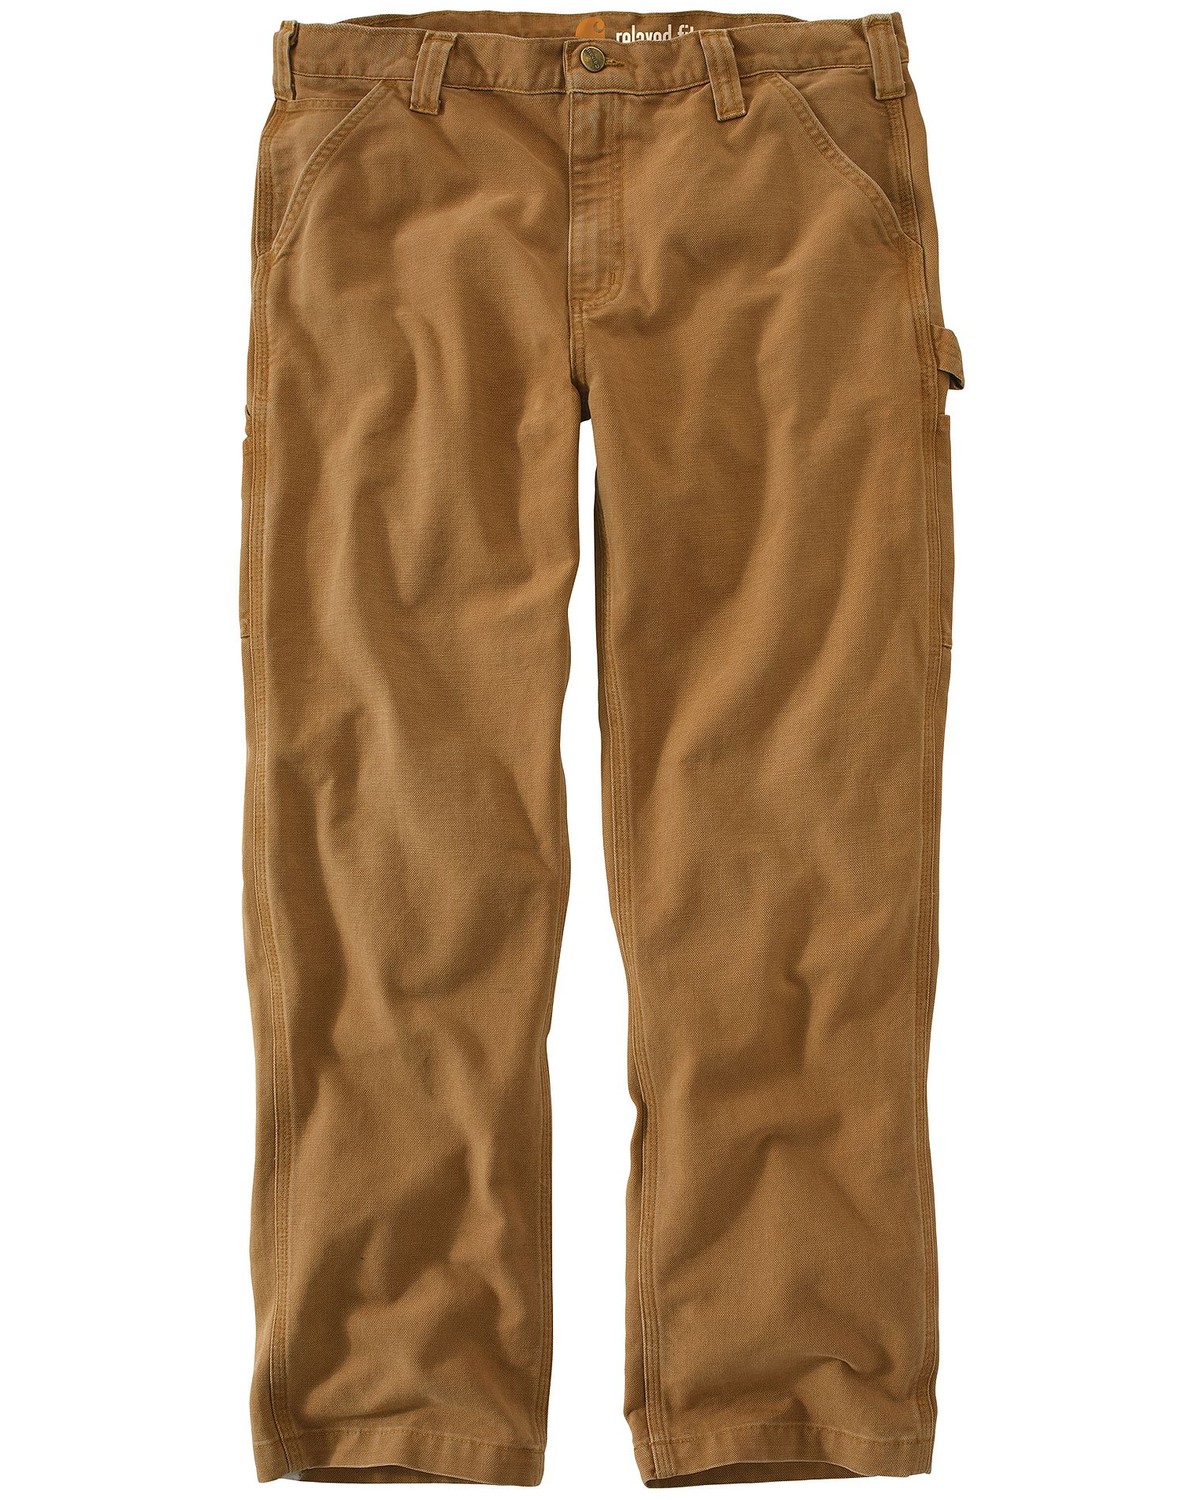 Carhartt Weathered Duck Dungaree Relaxed Fit Work Pants | Sheplers